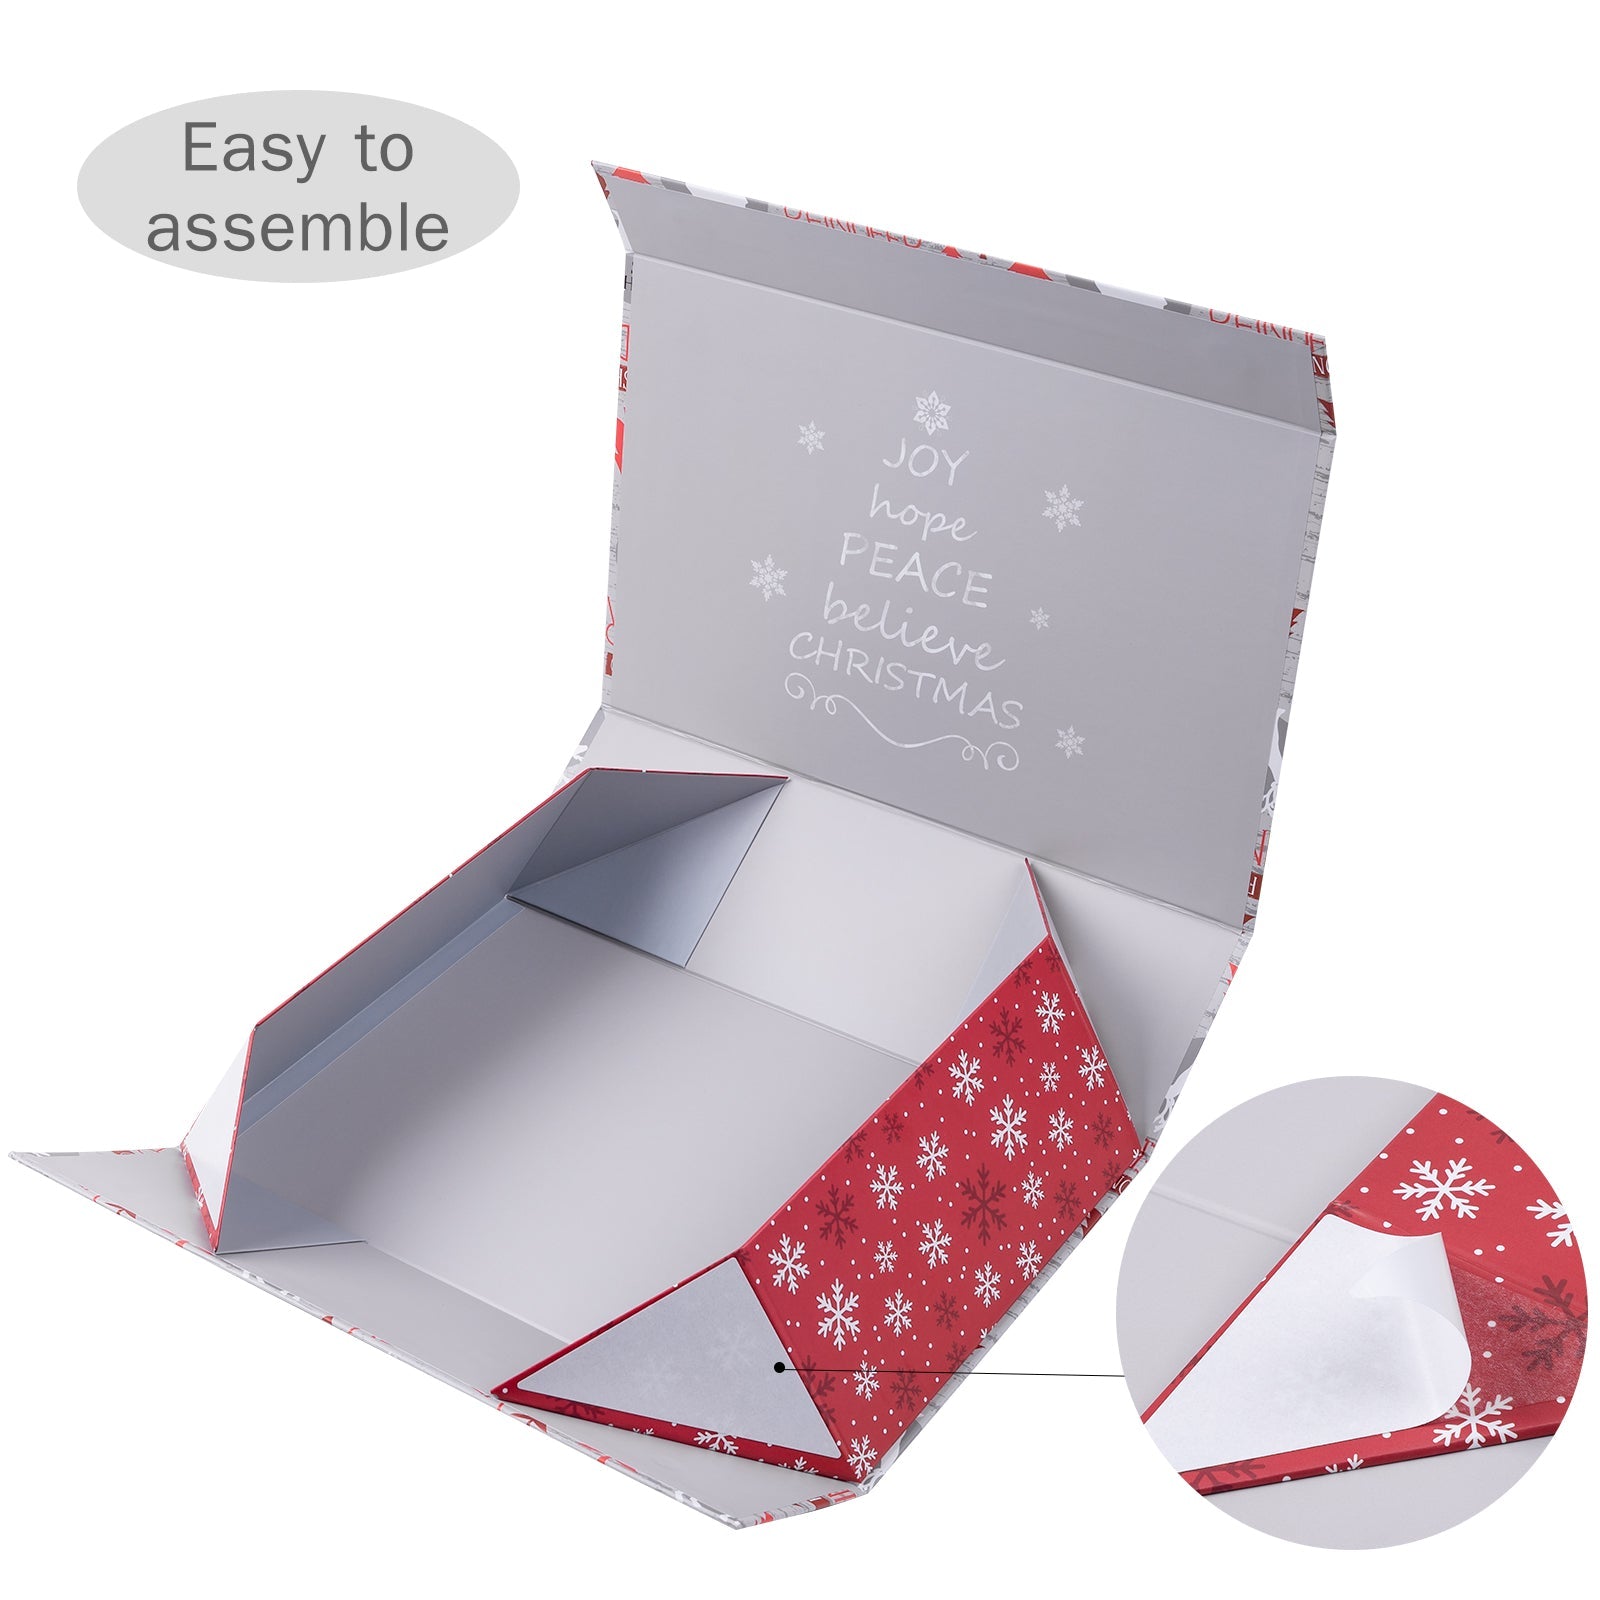 Foldable gift box with magnetic closure